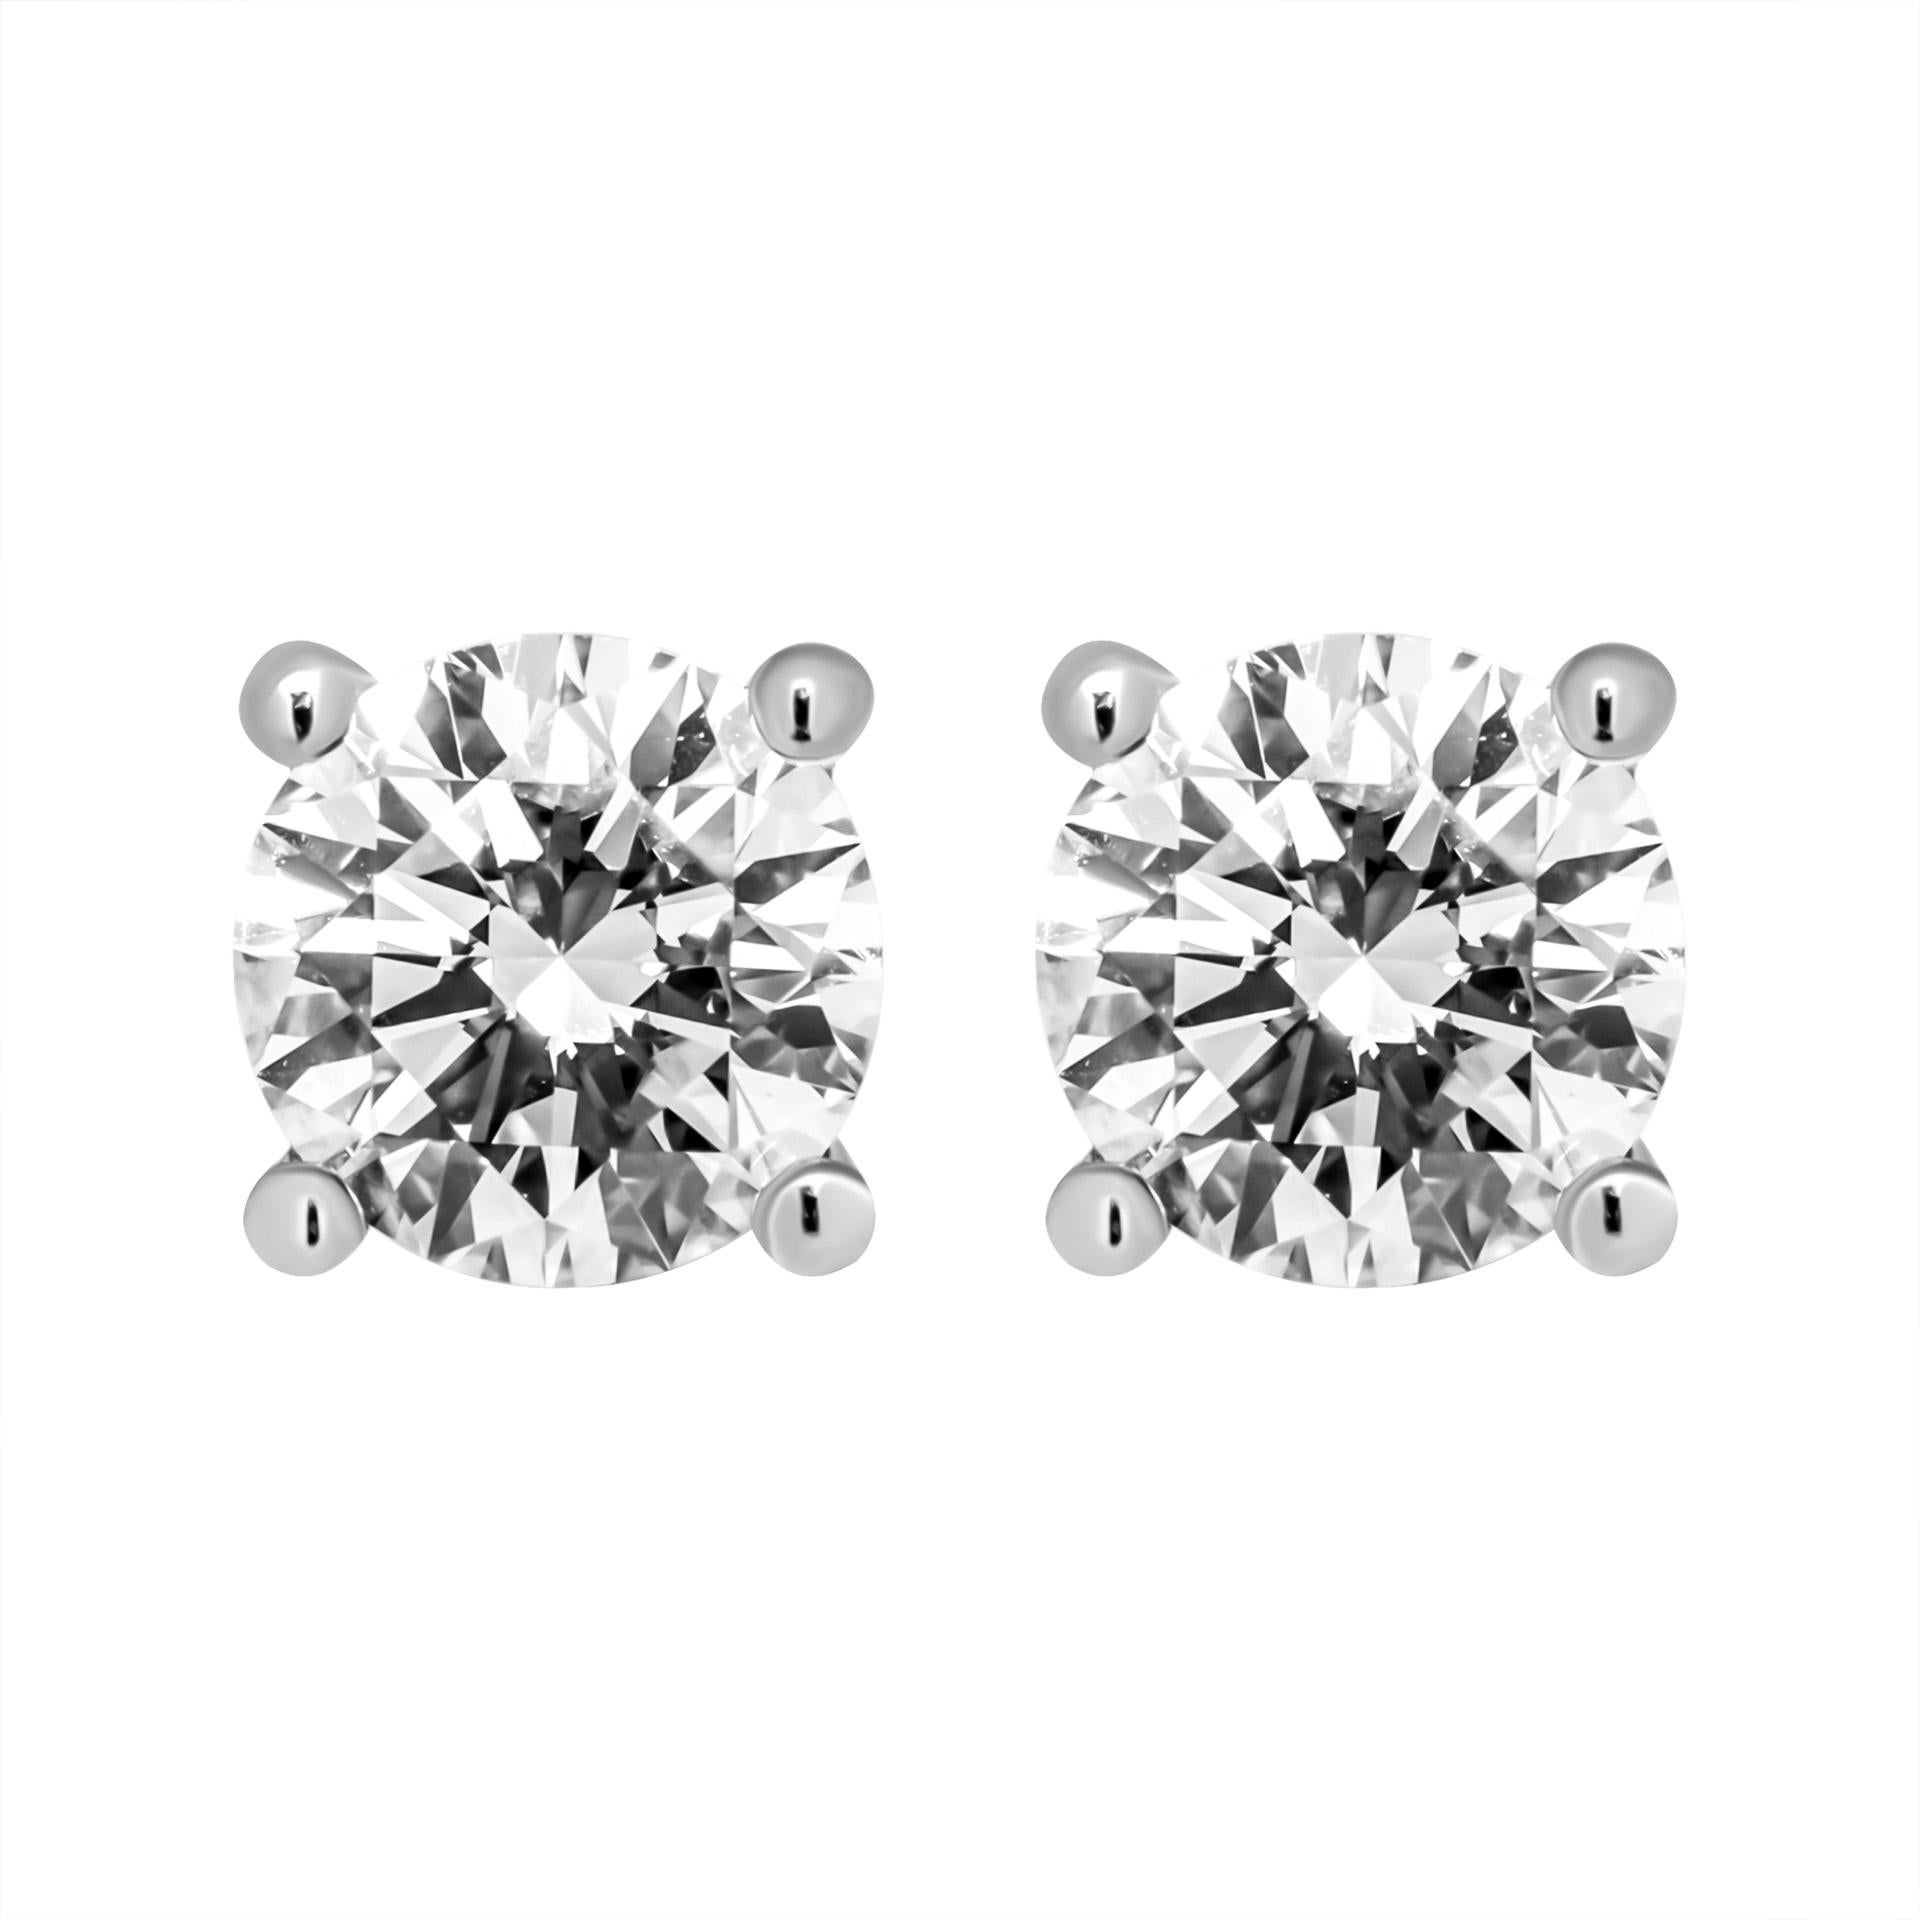 Four-Prong Round Diamond Stud Earrings in Platinum 
ROUND 4 prongs studs in Platinum 
Stones: 
 1.01ct I VS2 Round Shape Diamond GIA#2225100117 
 1.01ct I VS2 Round Shape Diamond GIA#7412773046 
Totaling: 2.02 carat

With pressure back lock system